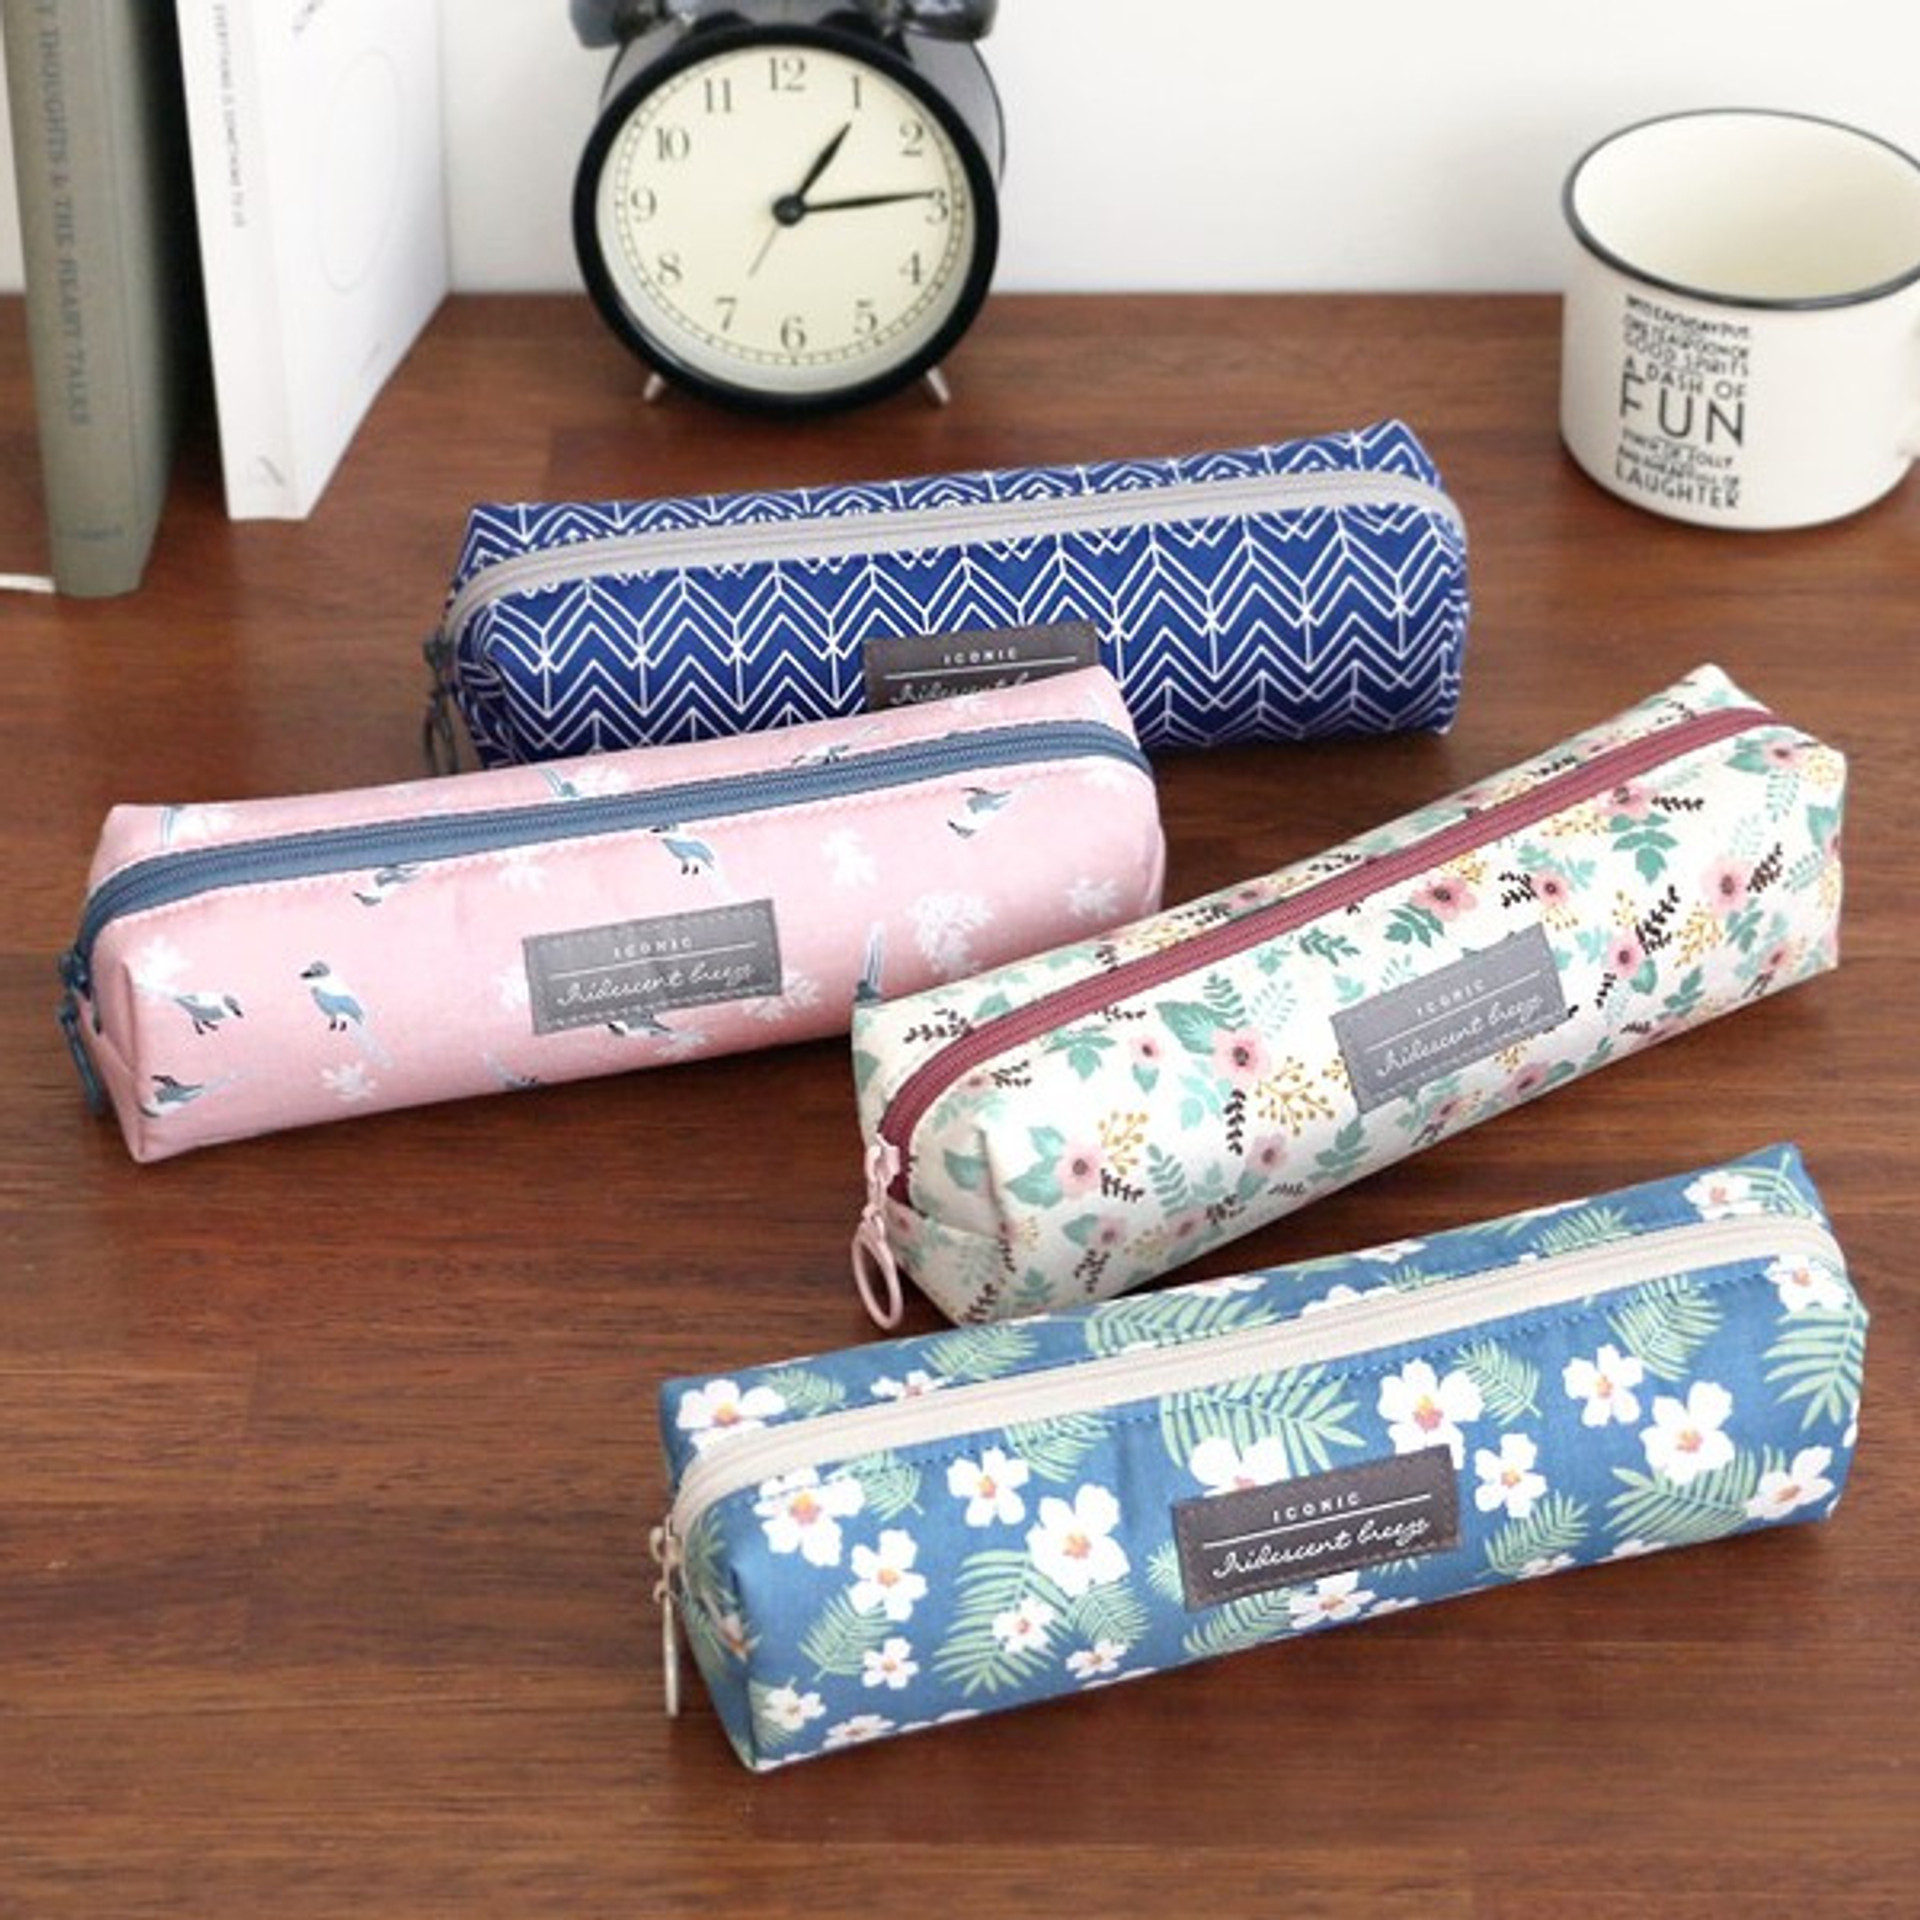 Iconic Comely pattern zipper pencil case - fallindesign.com